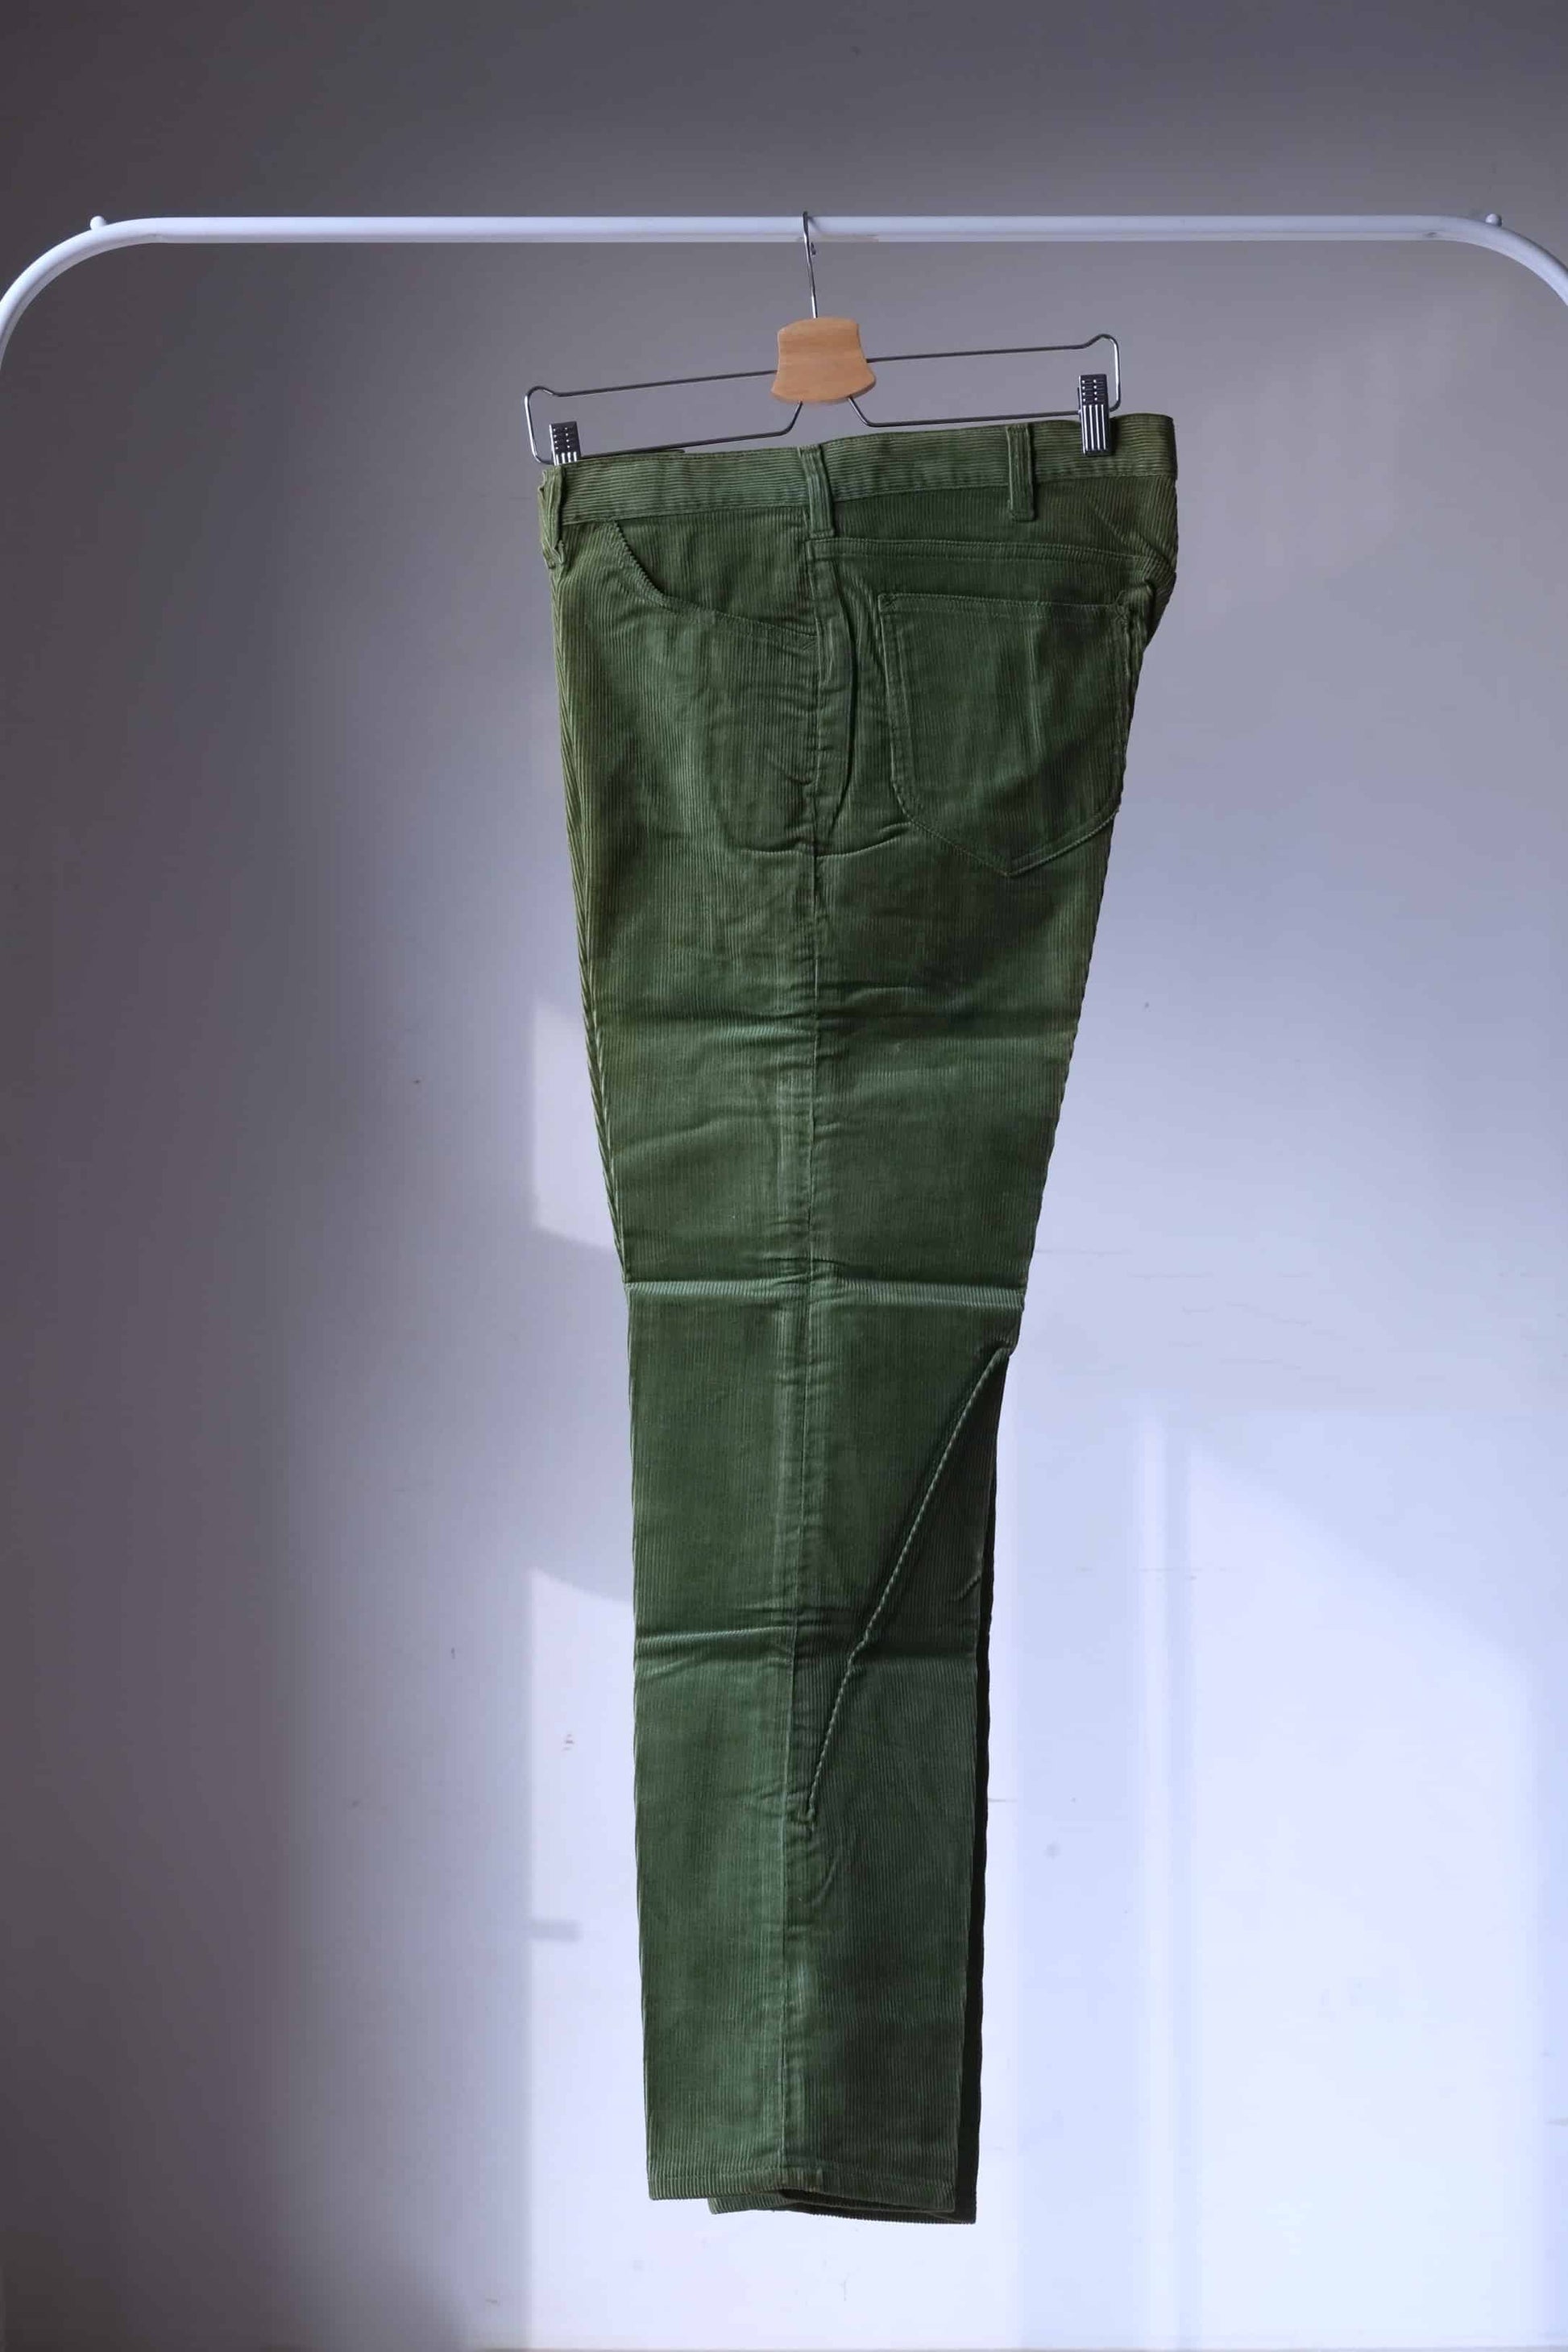 LEE Corduoroy Pants in olive green photgraphed on hanger from the side